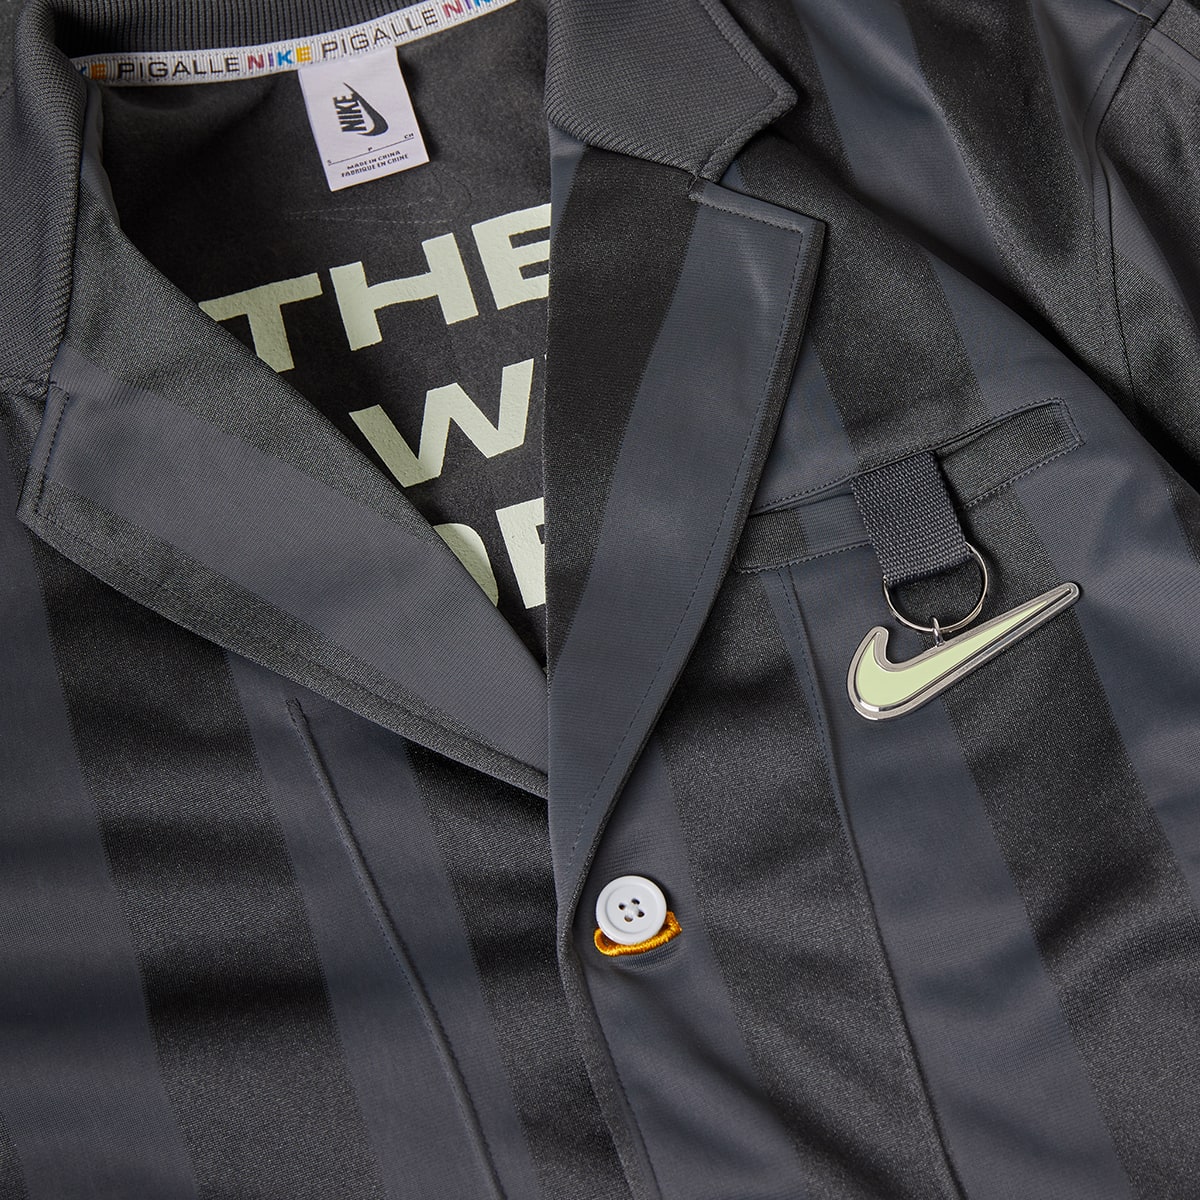 Nike x Pigalle NRG Track Jacket (Anthracite) | END. Launches